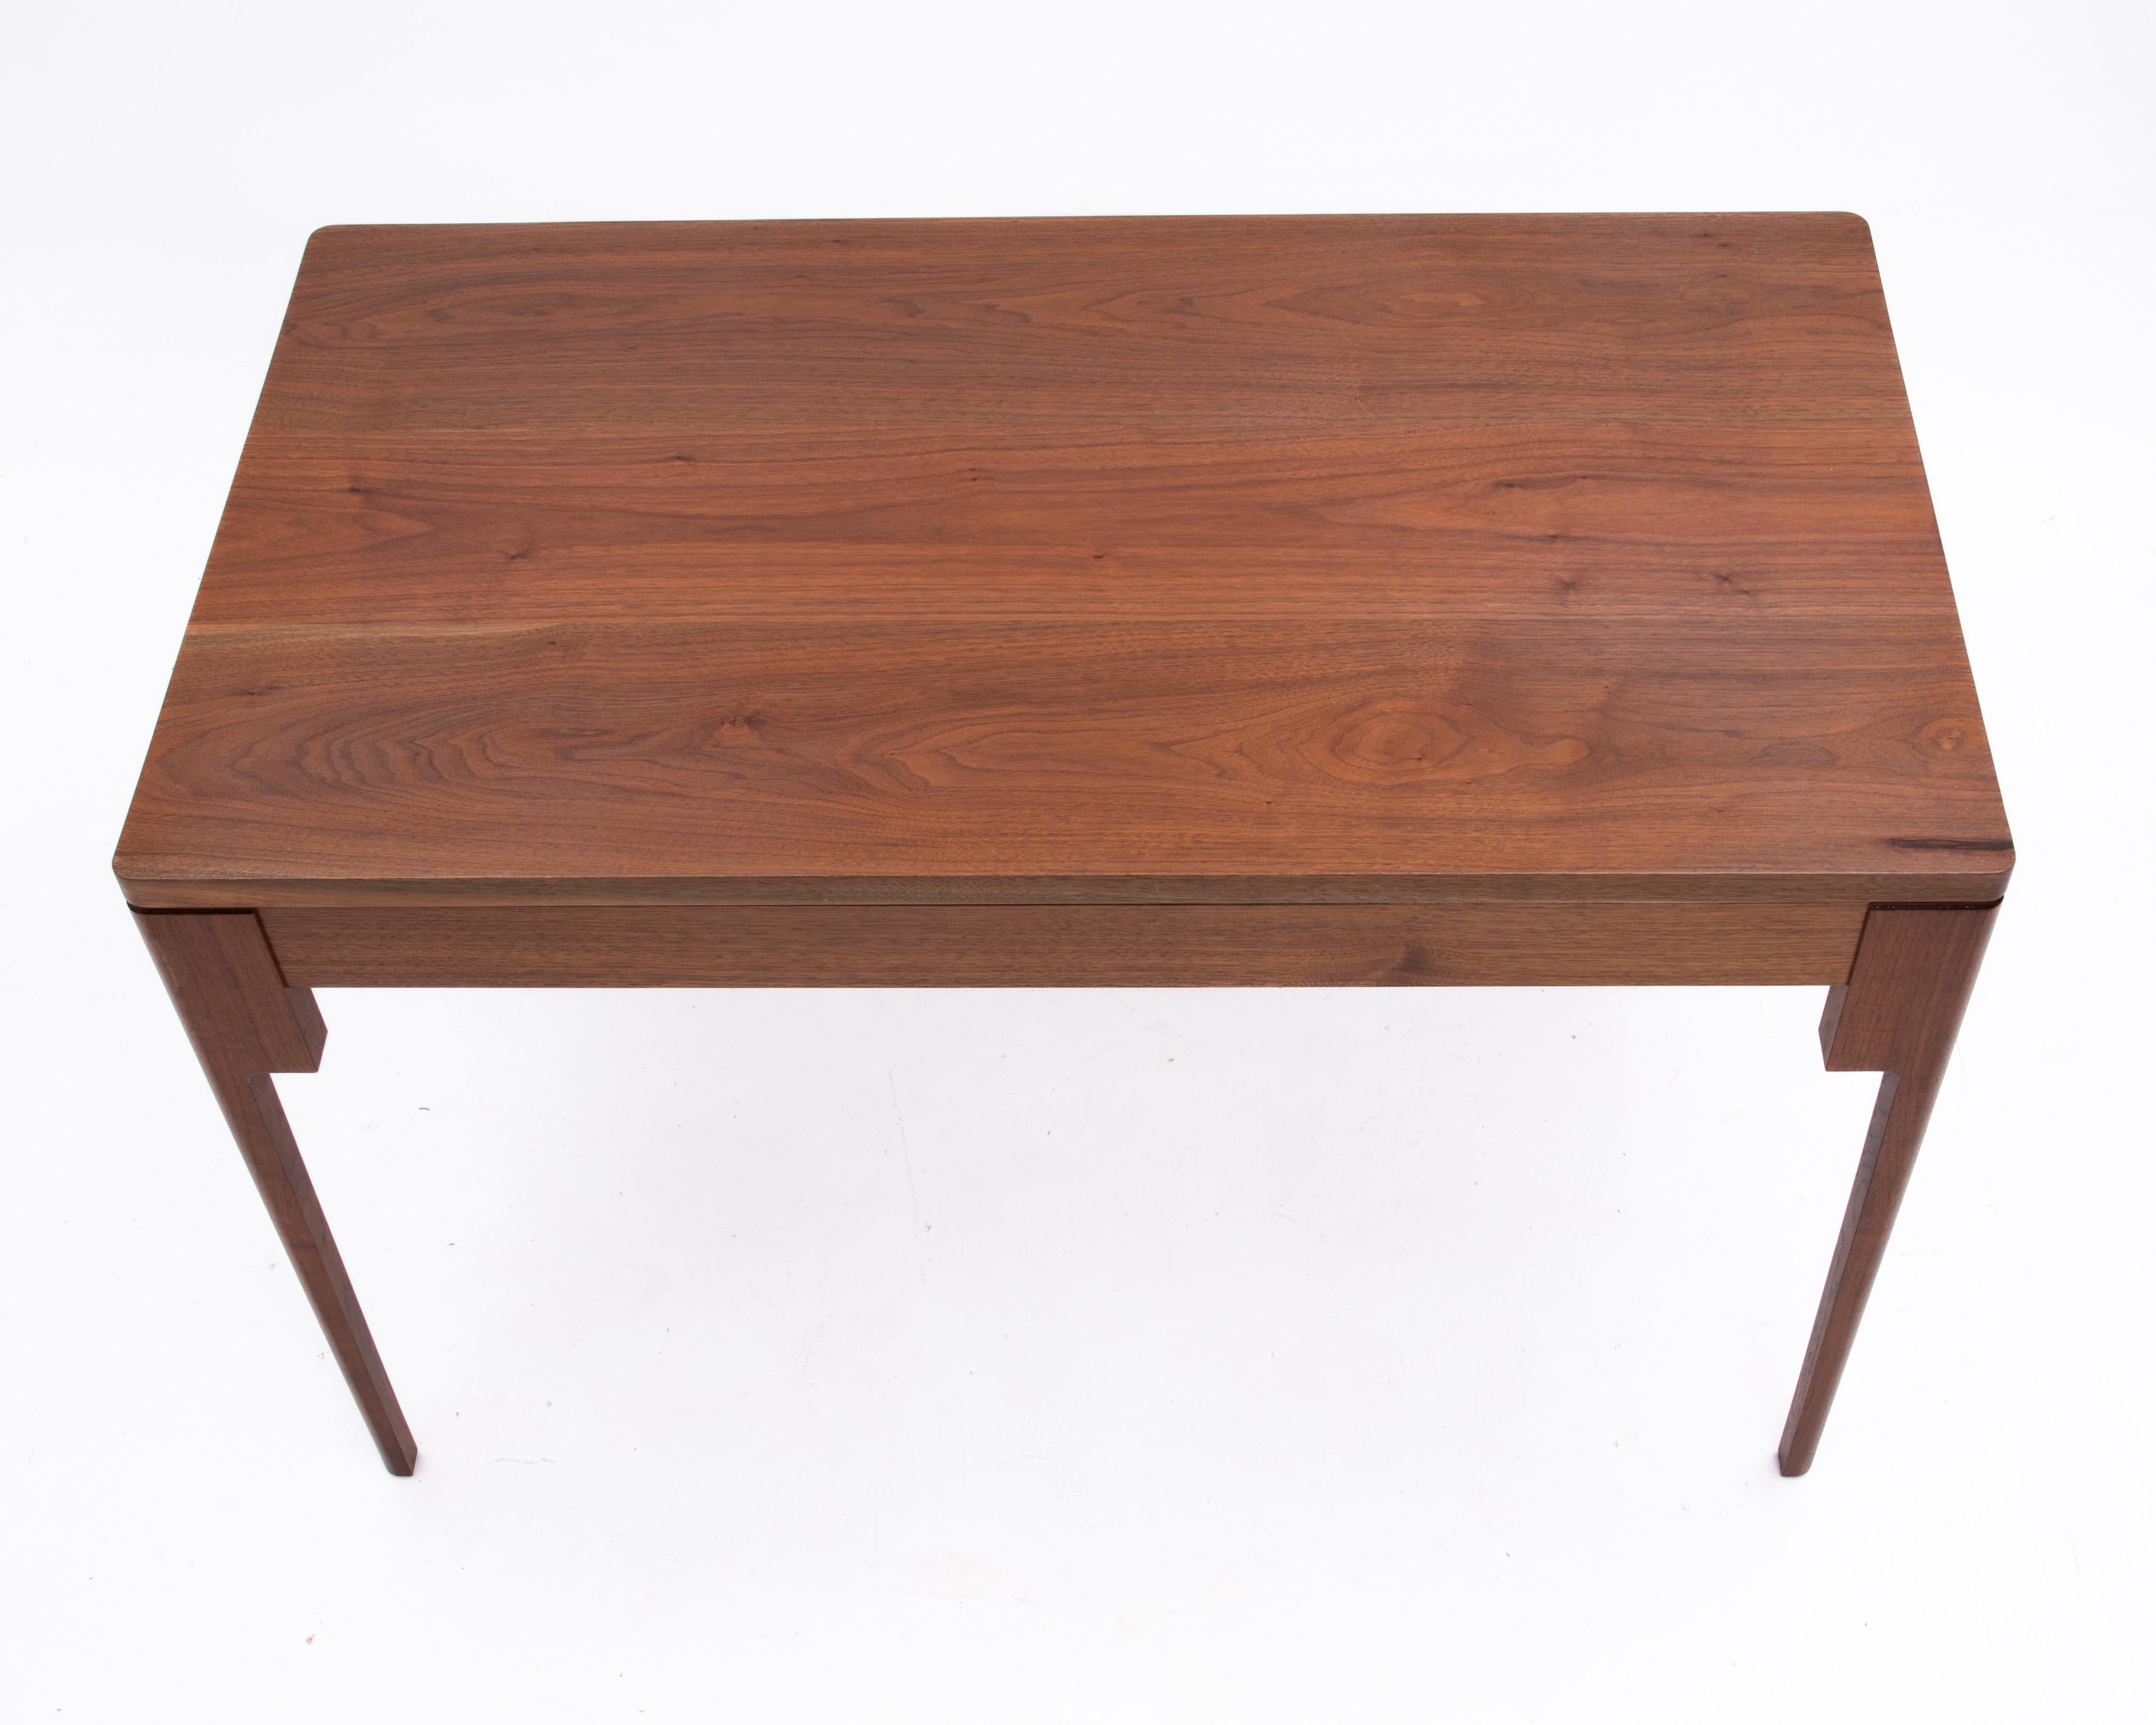 Contemporary Bespoke Solid Walnut Desk Dining Table Floating Top Tapered Legs New Hope School For Sale